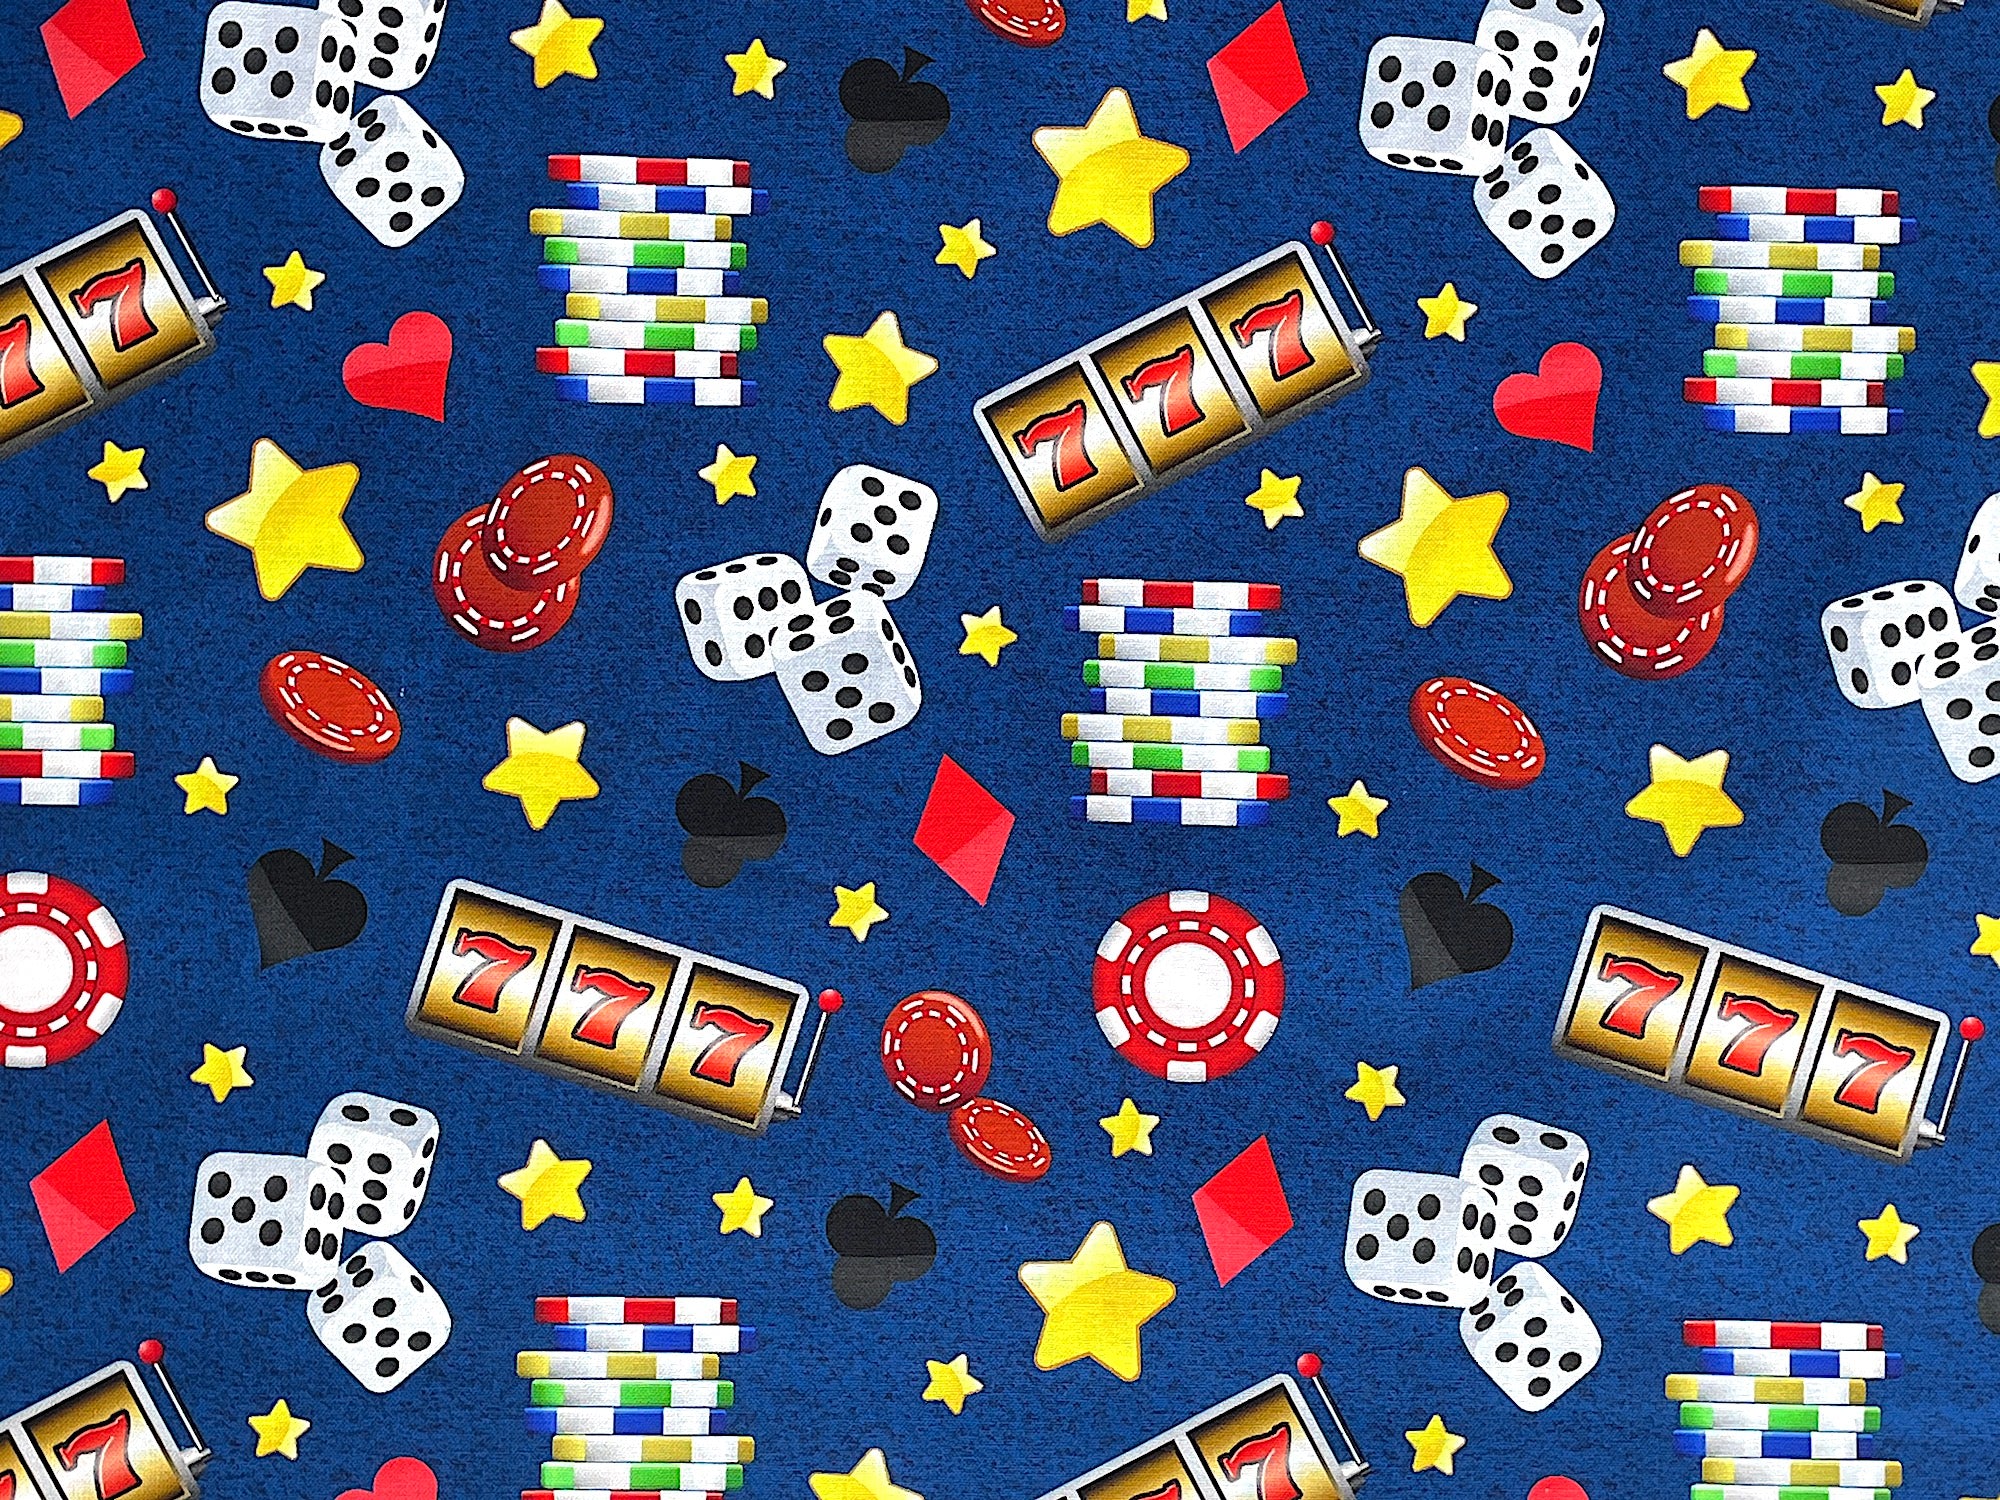 Blue cotton fabric covered with dice, casino chips, hearts, stars and more.